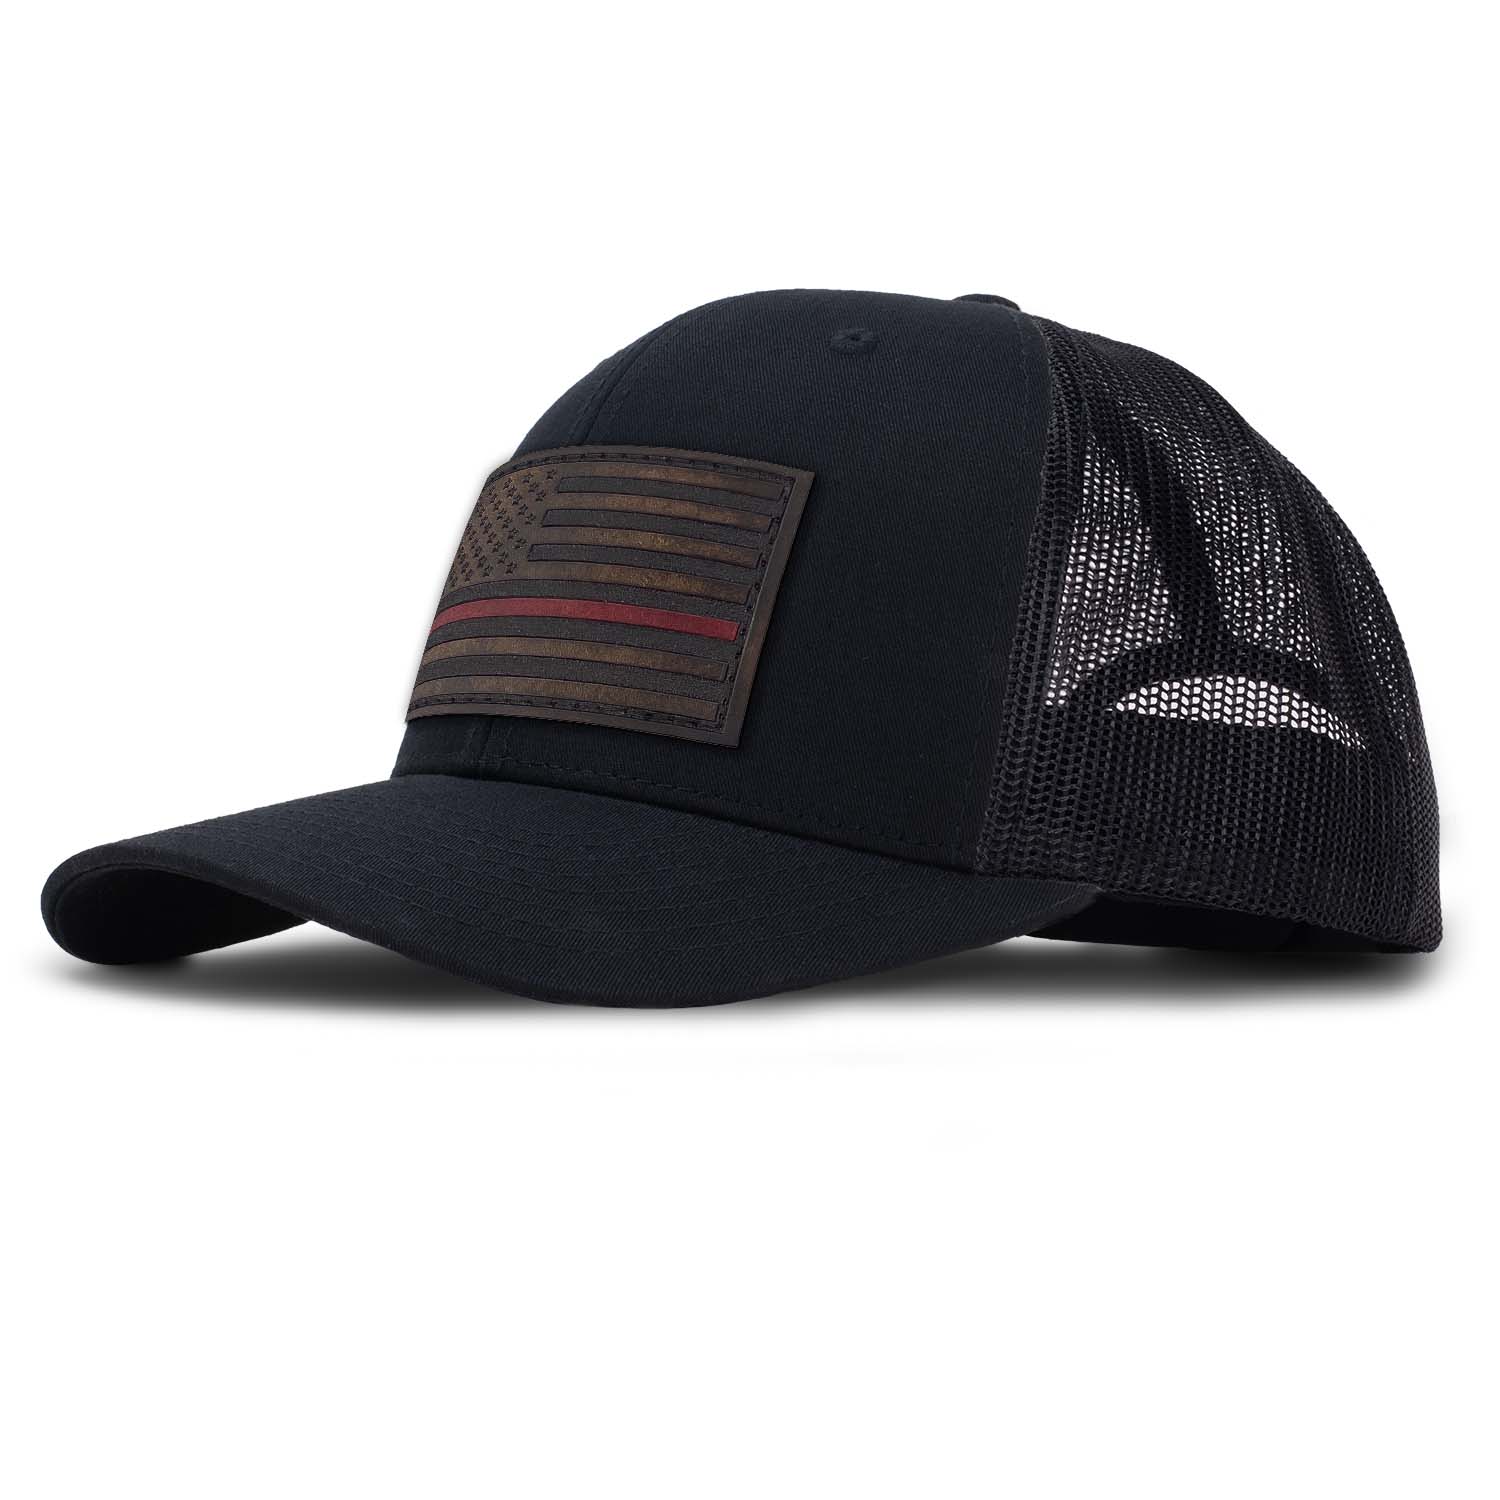 Revolution Mfg Thin Red Line full grain leather American flag patch on a classic black trucker hat with black mesh